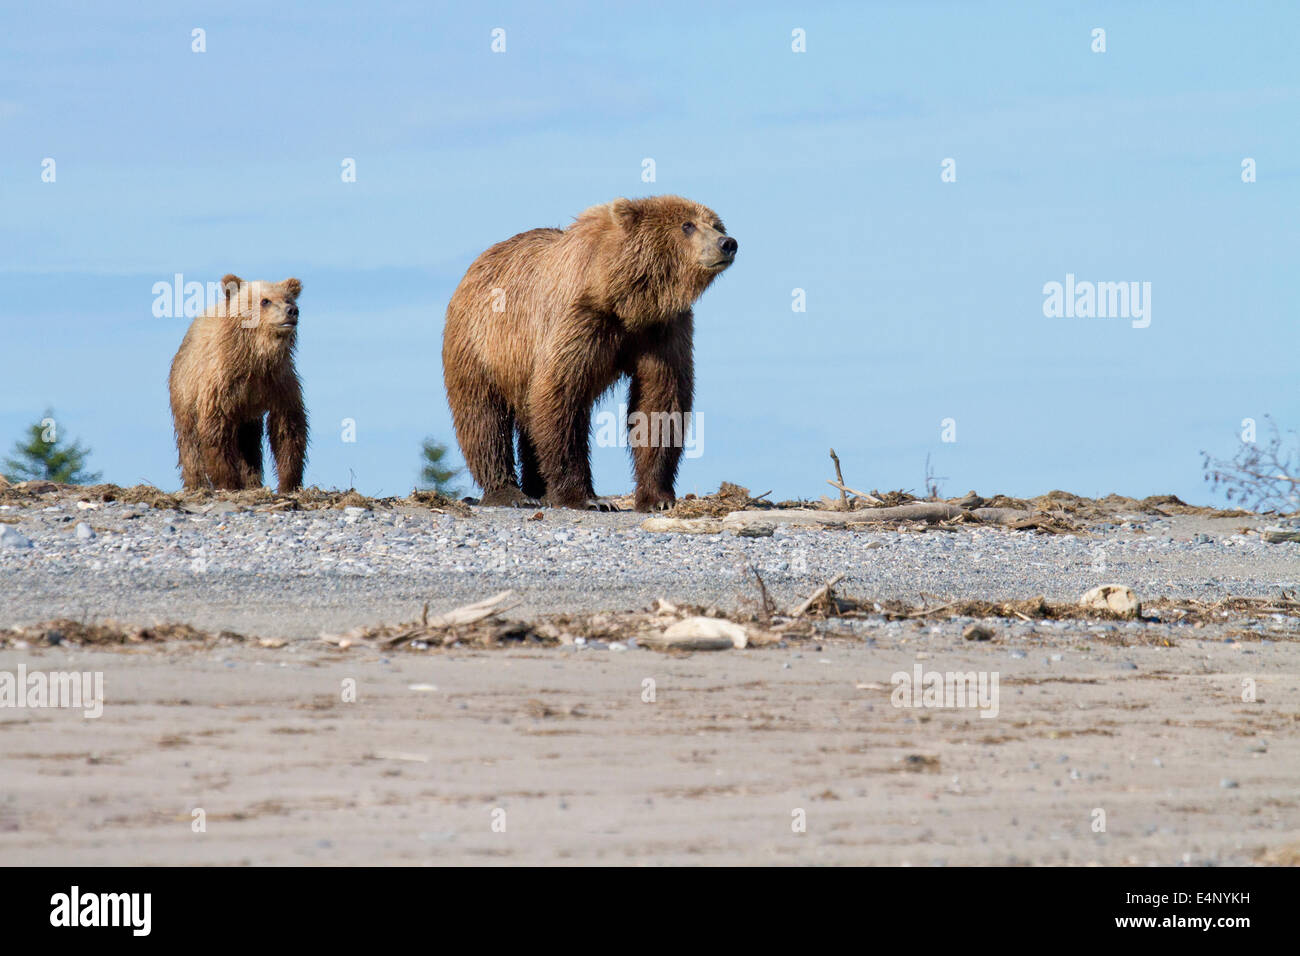 Grizzly bear and cub looking out from vantage point on sandy beach in Alaska Stock Photo